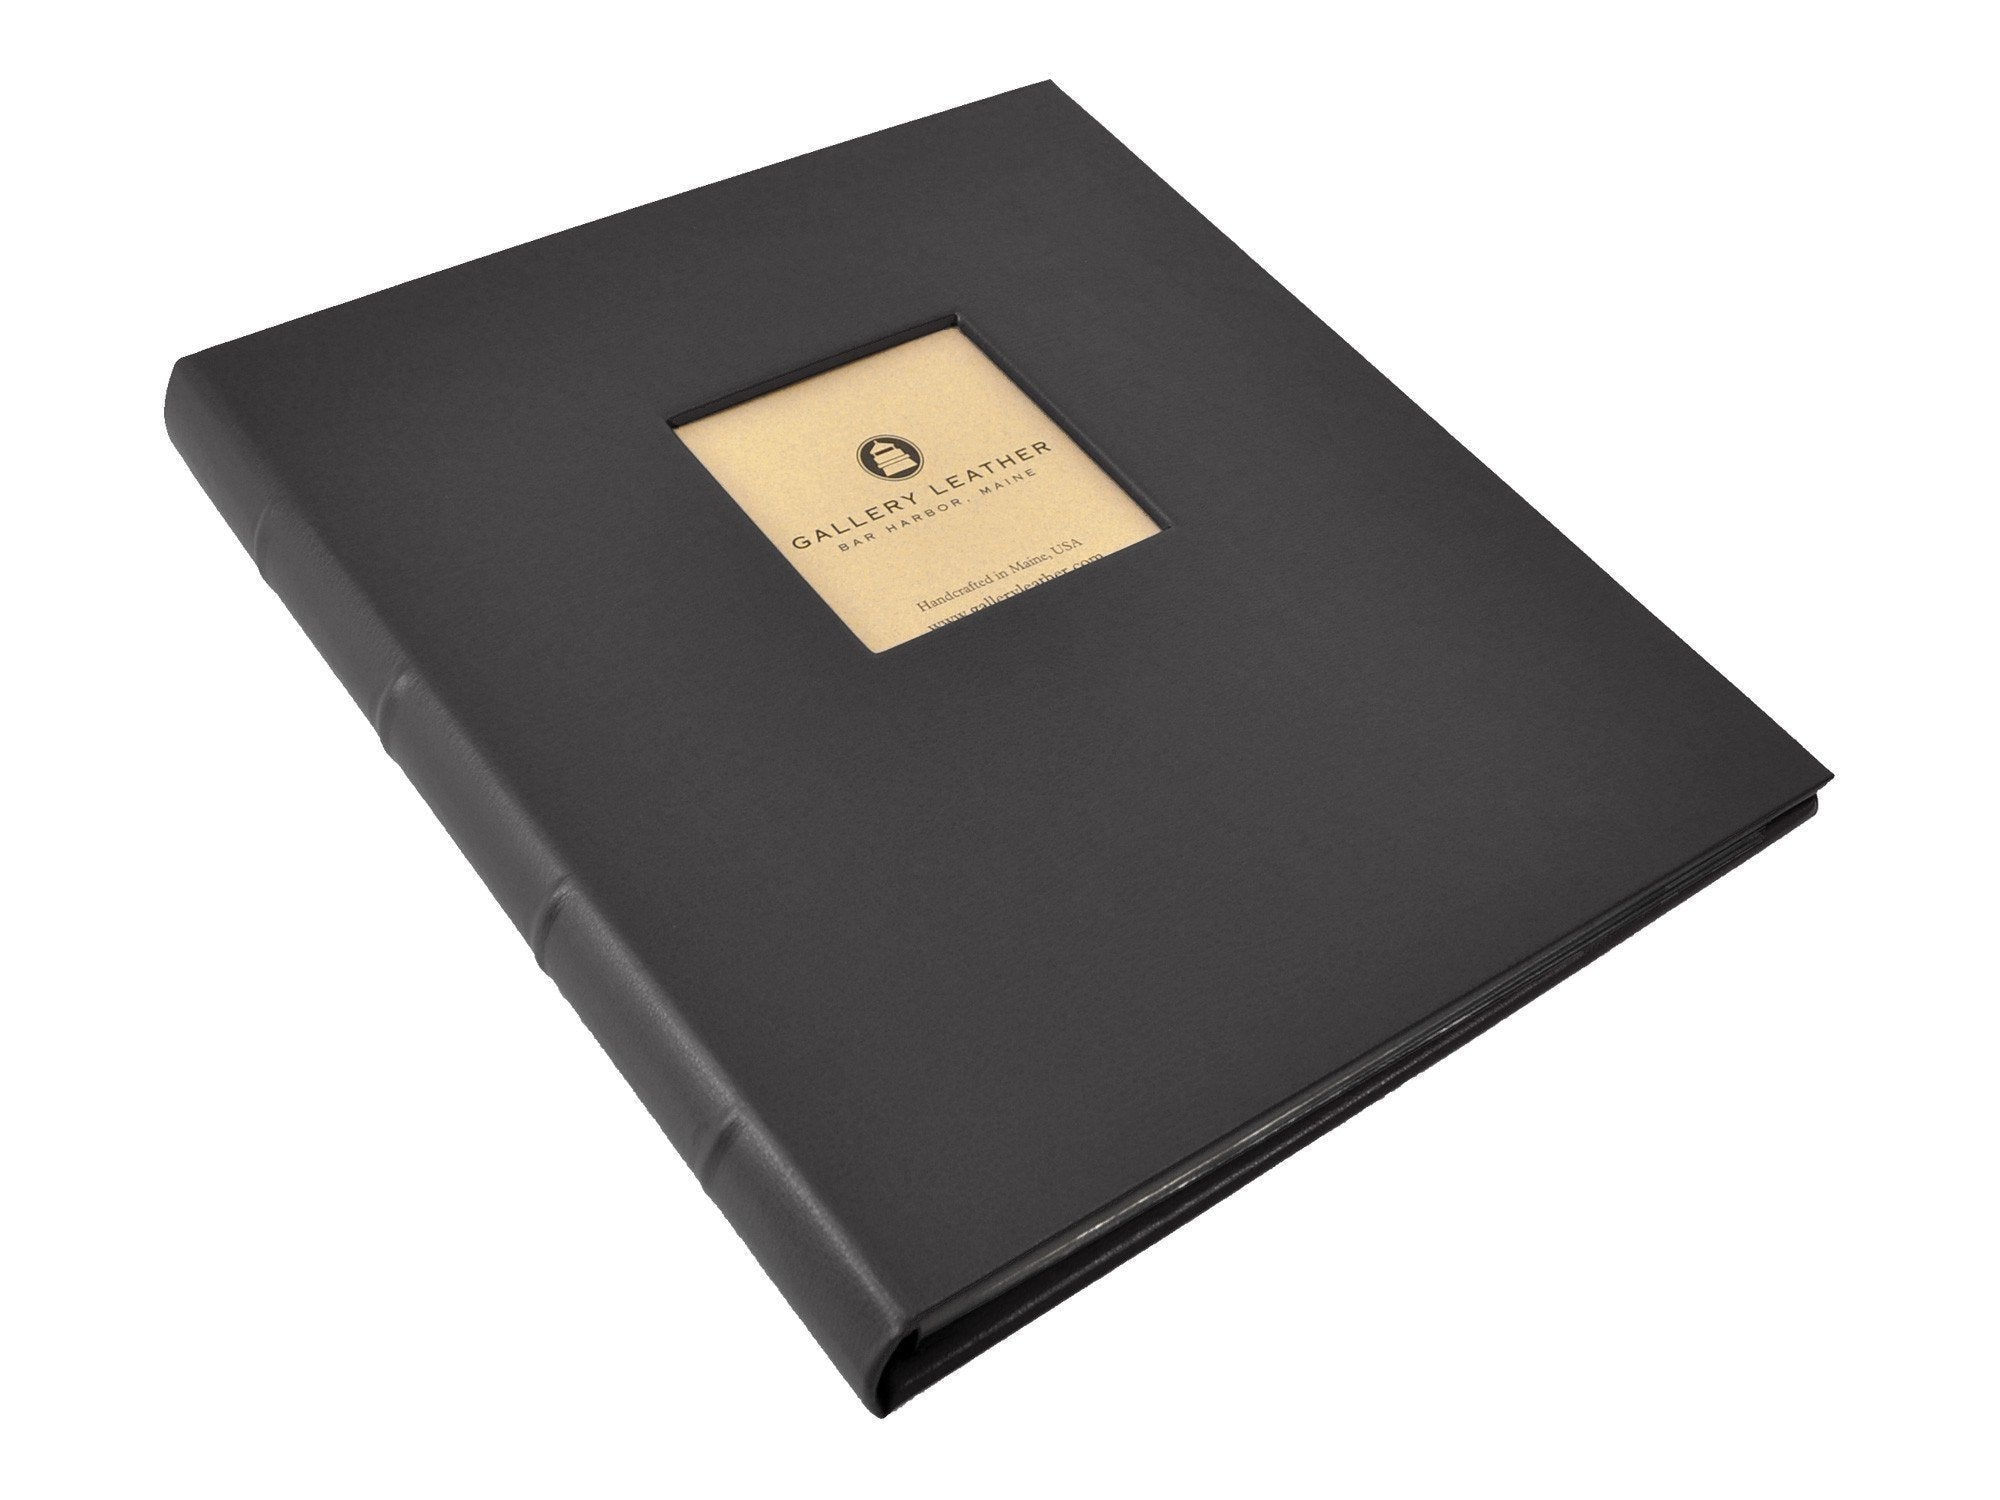 Gallery Leather Presentation Binder 3/4 with Window and Hubbed Spine Freeport Black